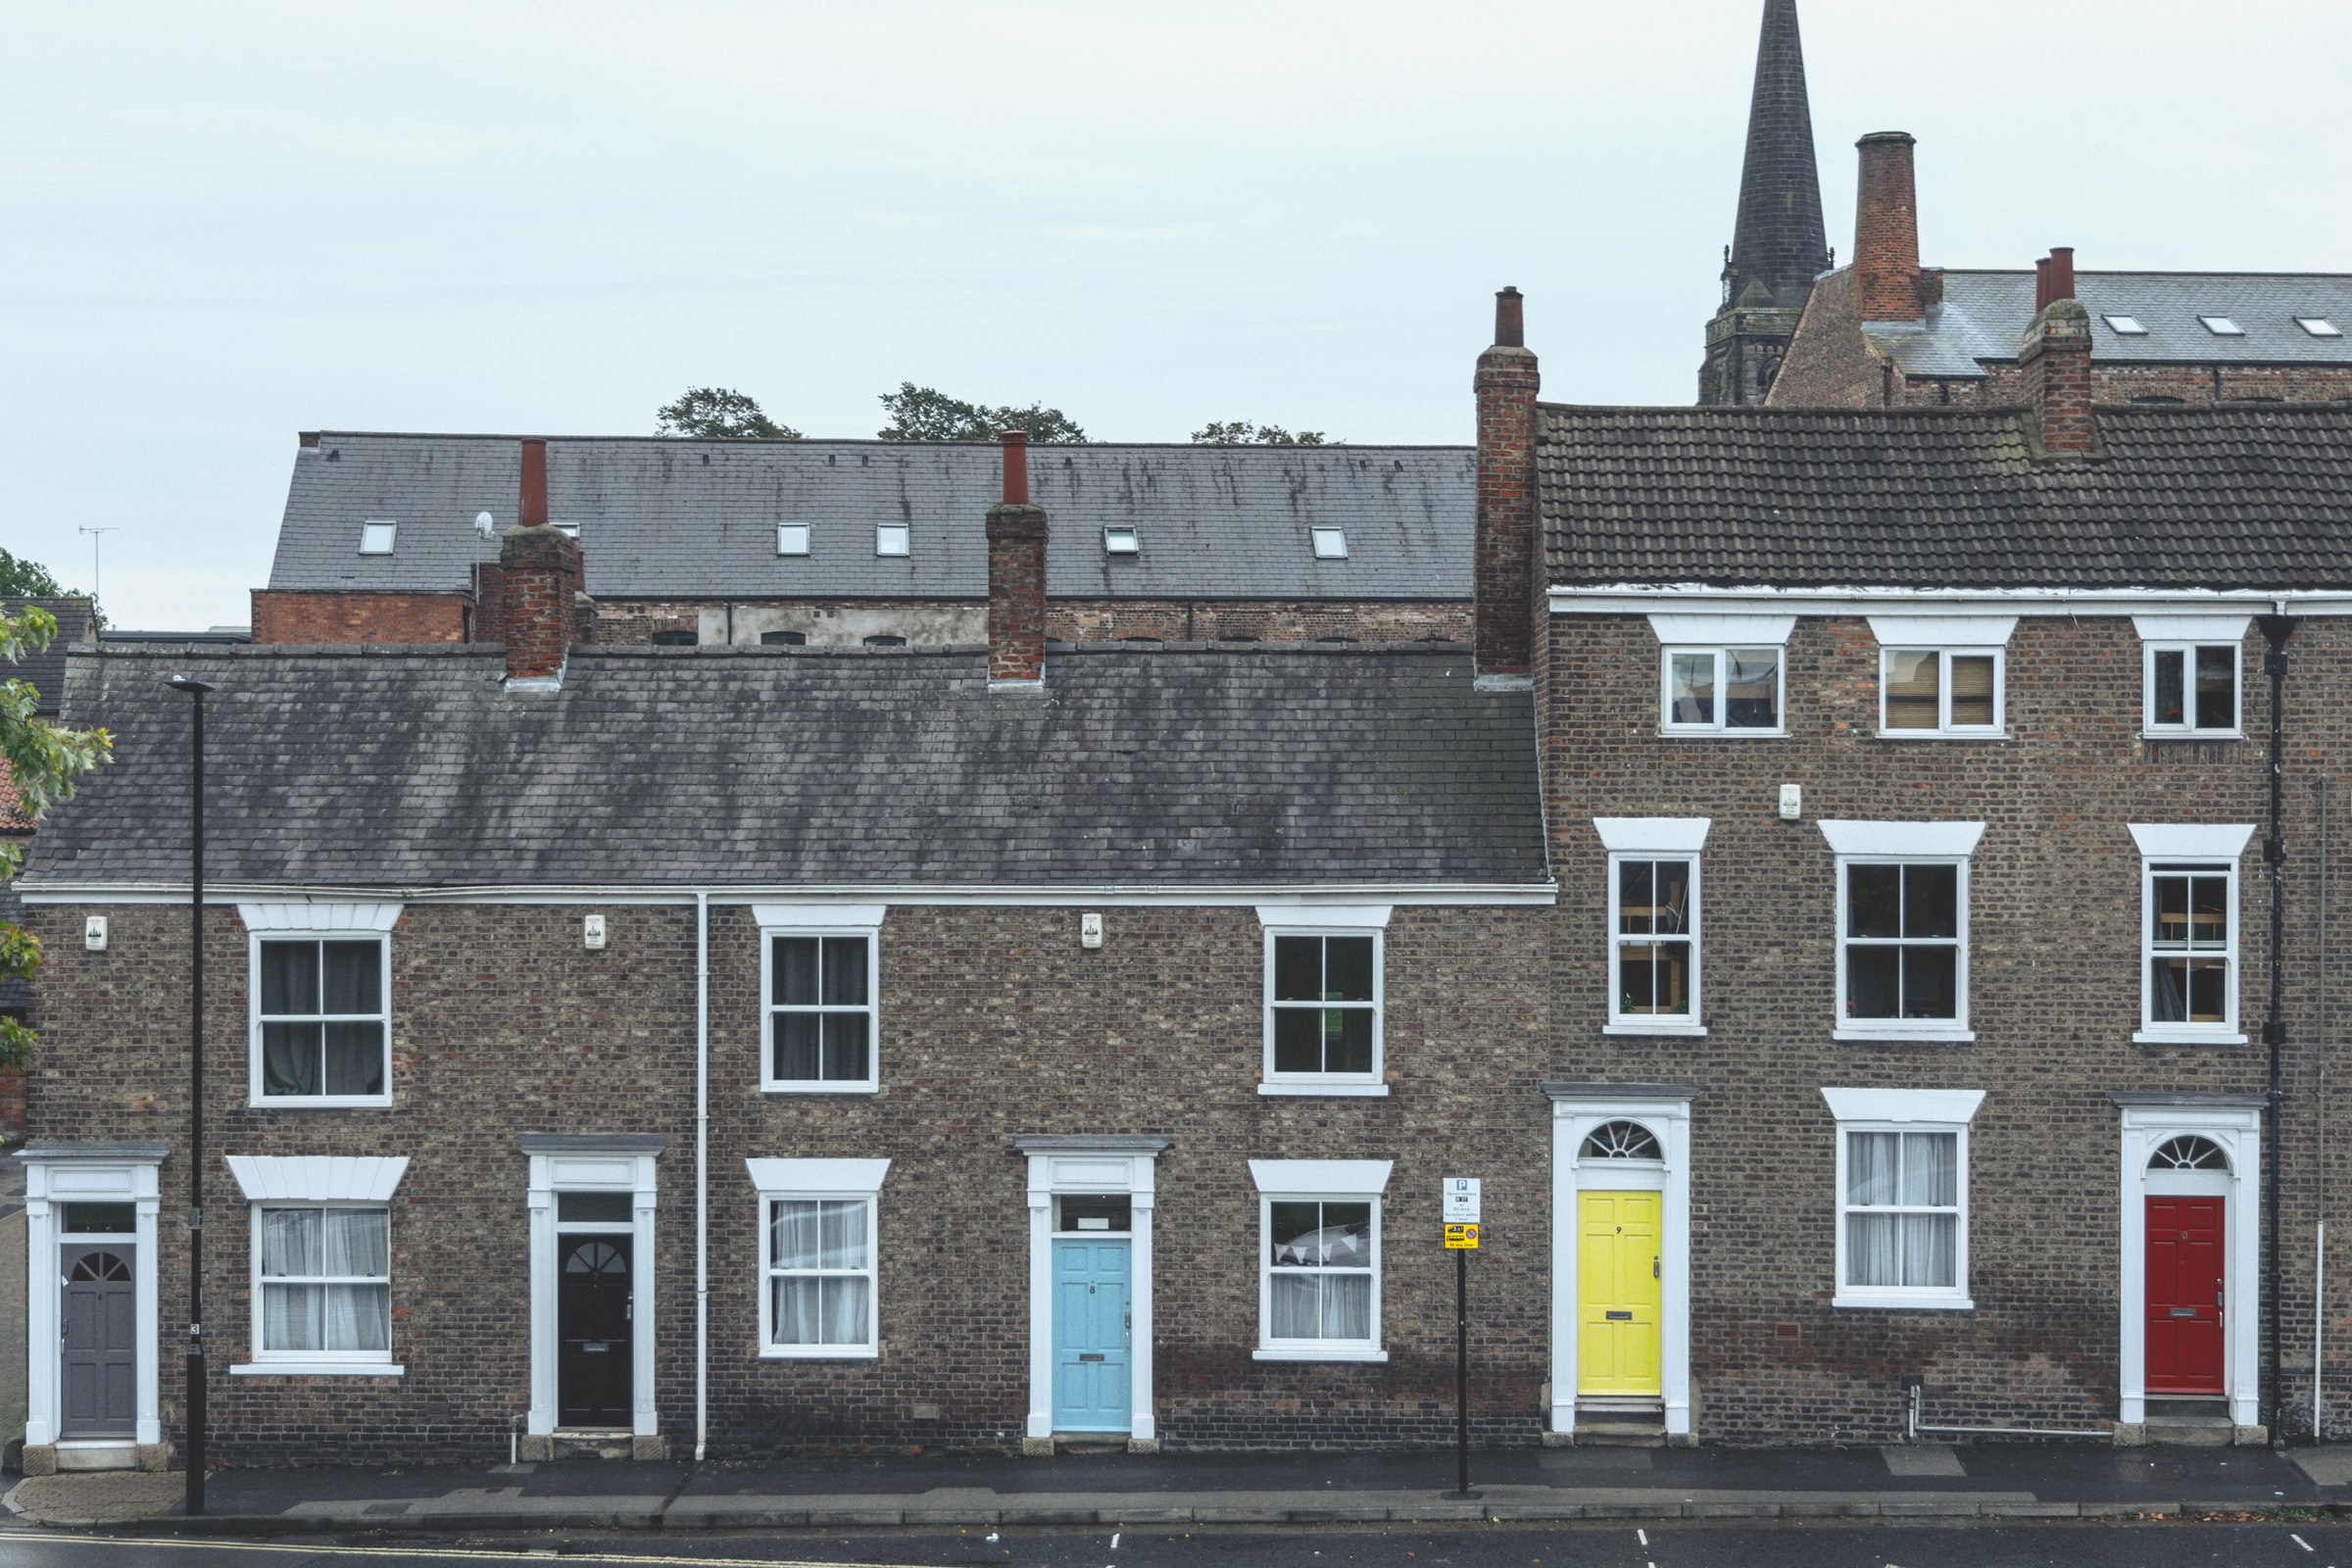 Row of town houses in the UK